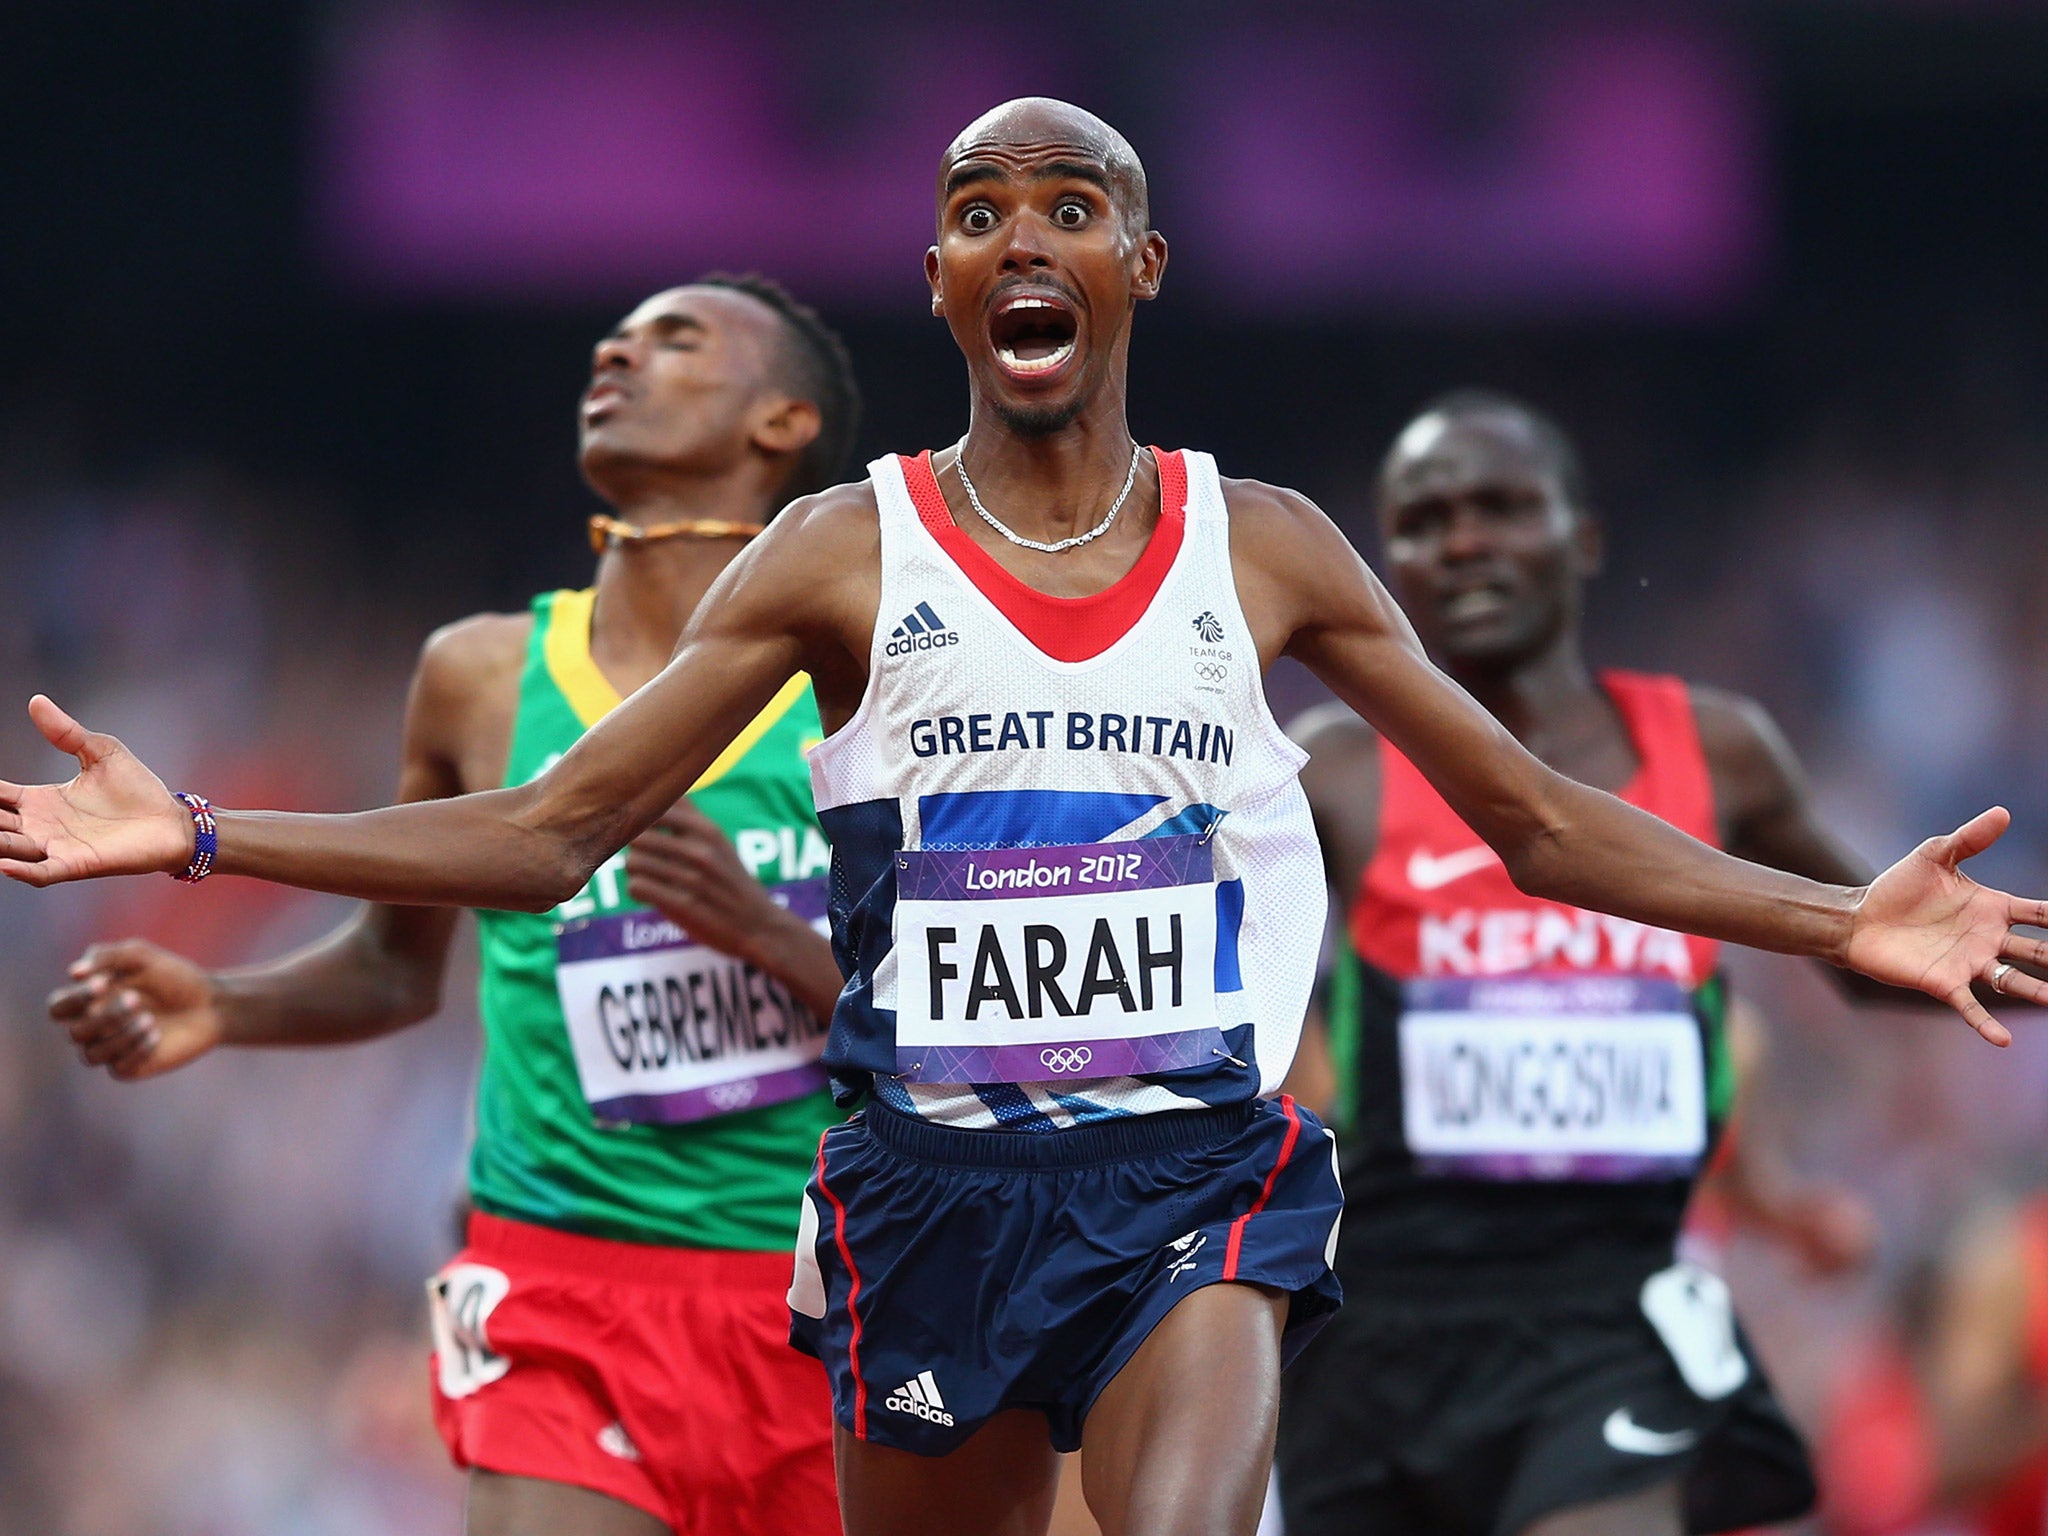 Mo Farah will look to add to his double Olympic gold medals from London 2012